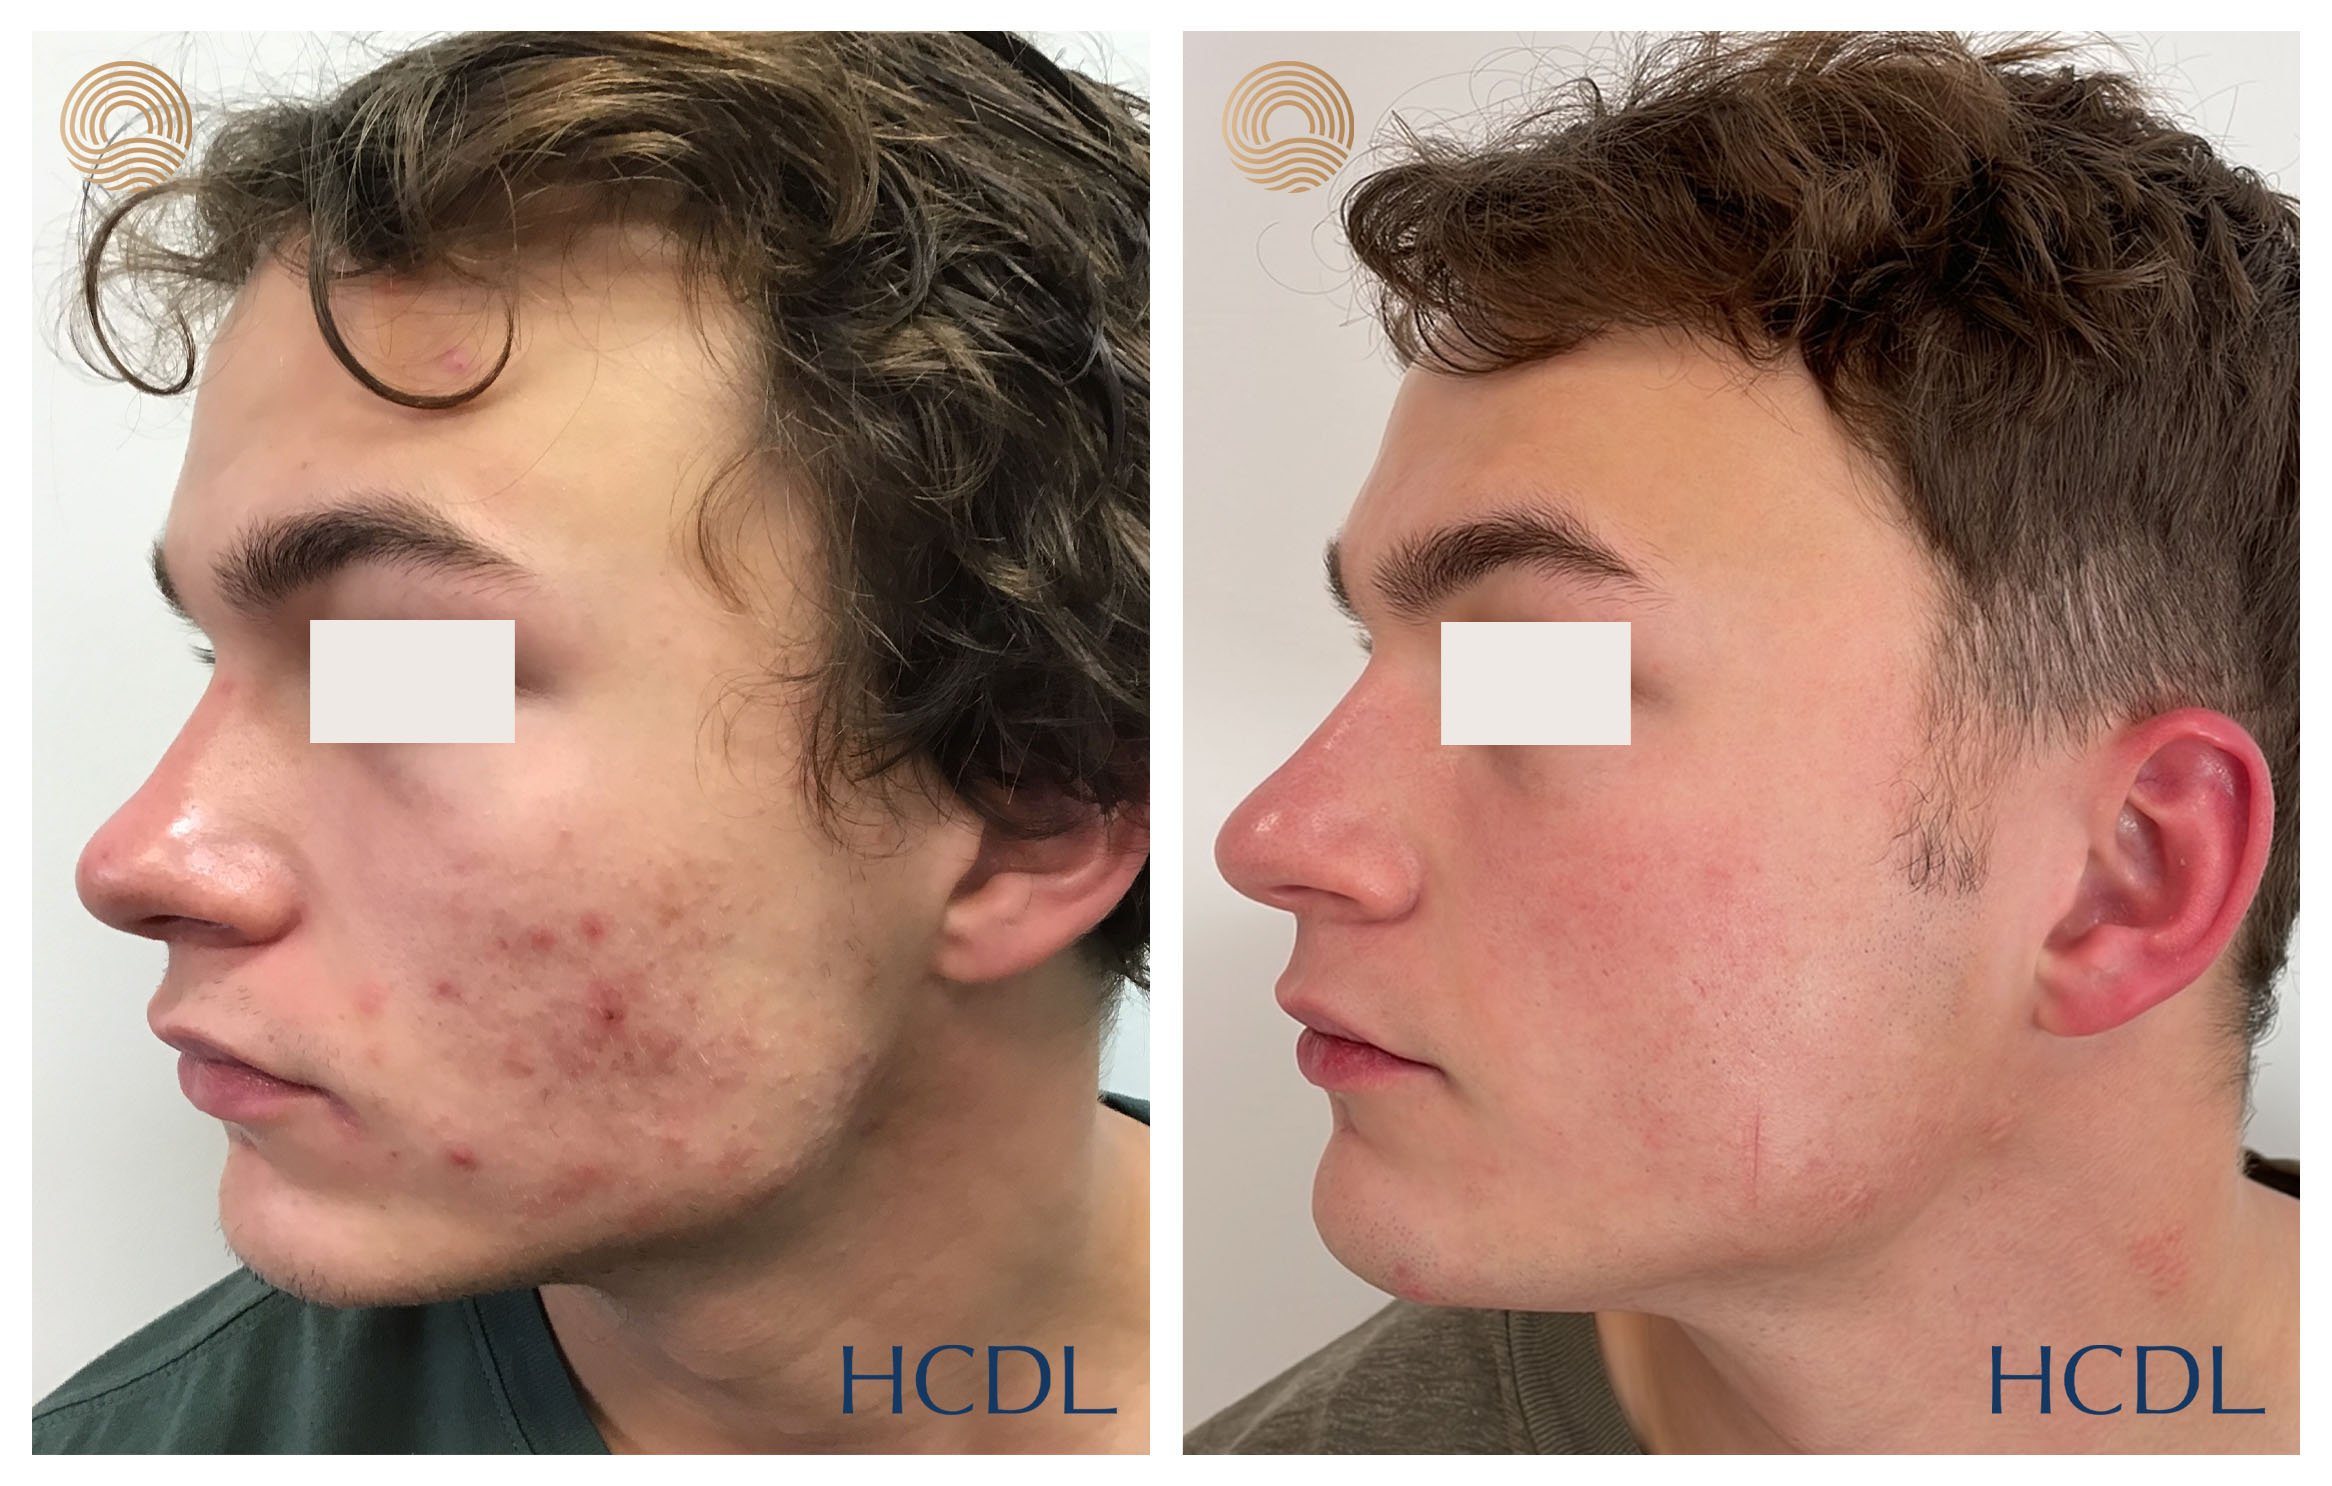 Combined medical and laser management after 12 months